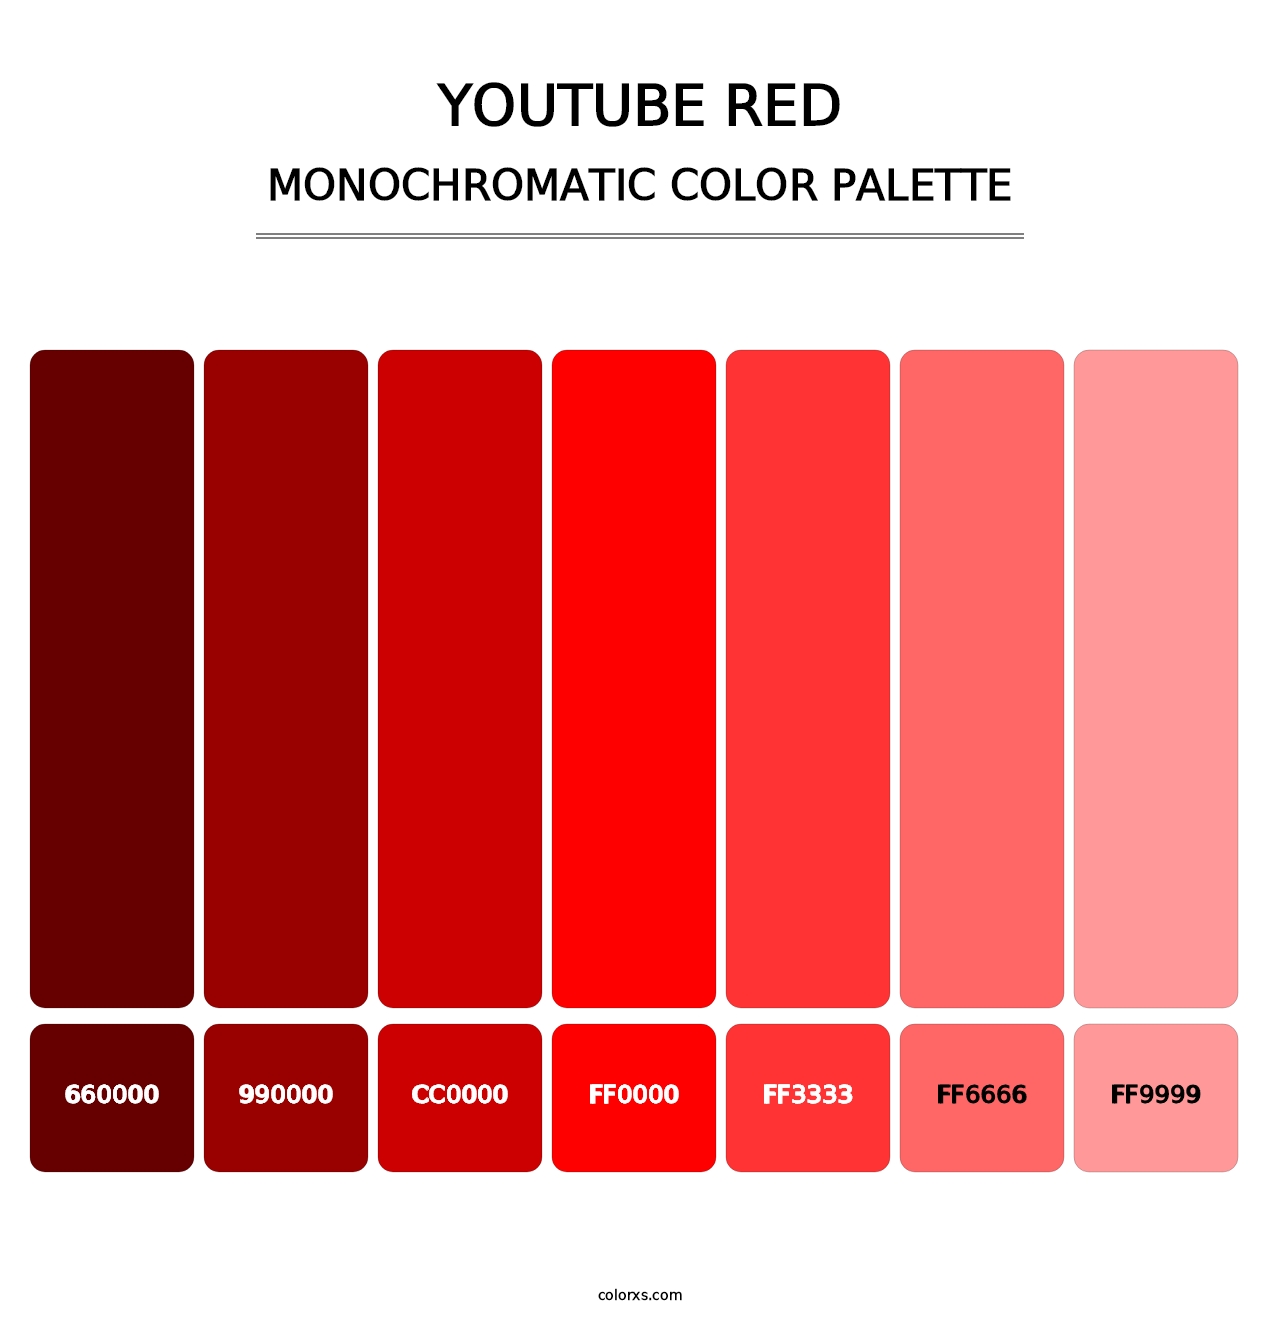 YouTube Red - Monochromatic Color Palette